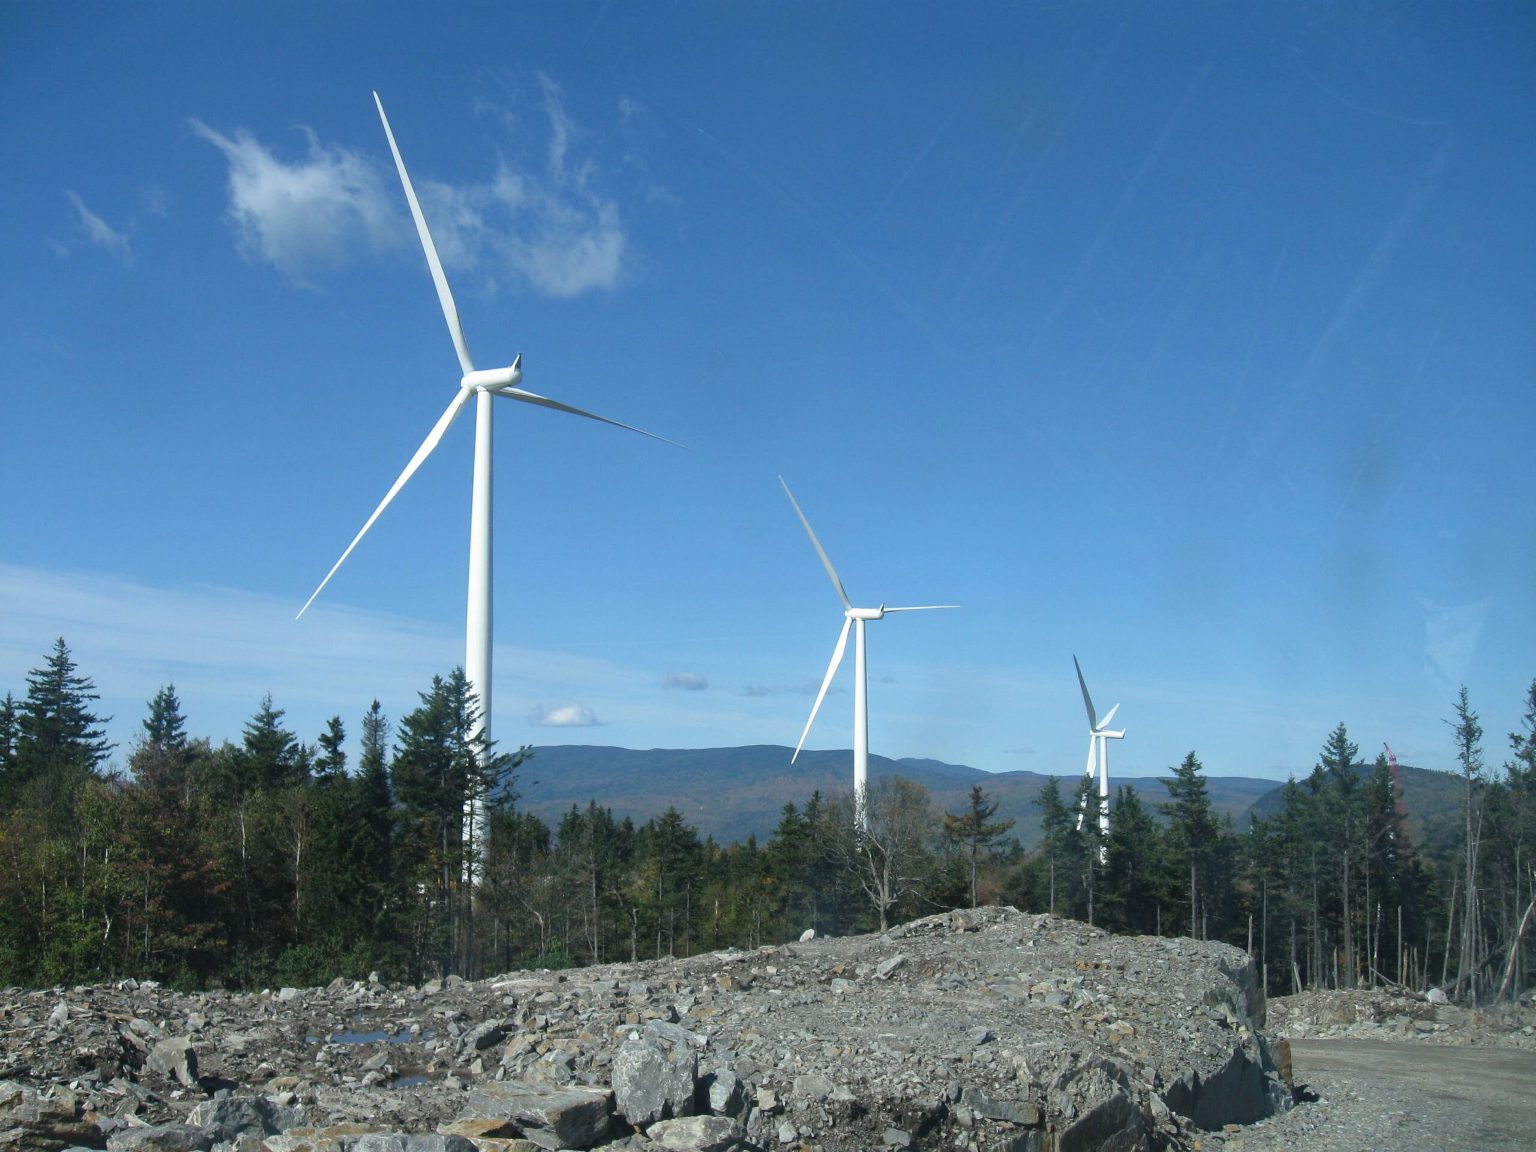 Scenic view of rocky landscape and wind turbine against a clear blue sky.